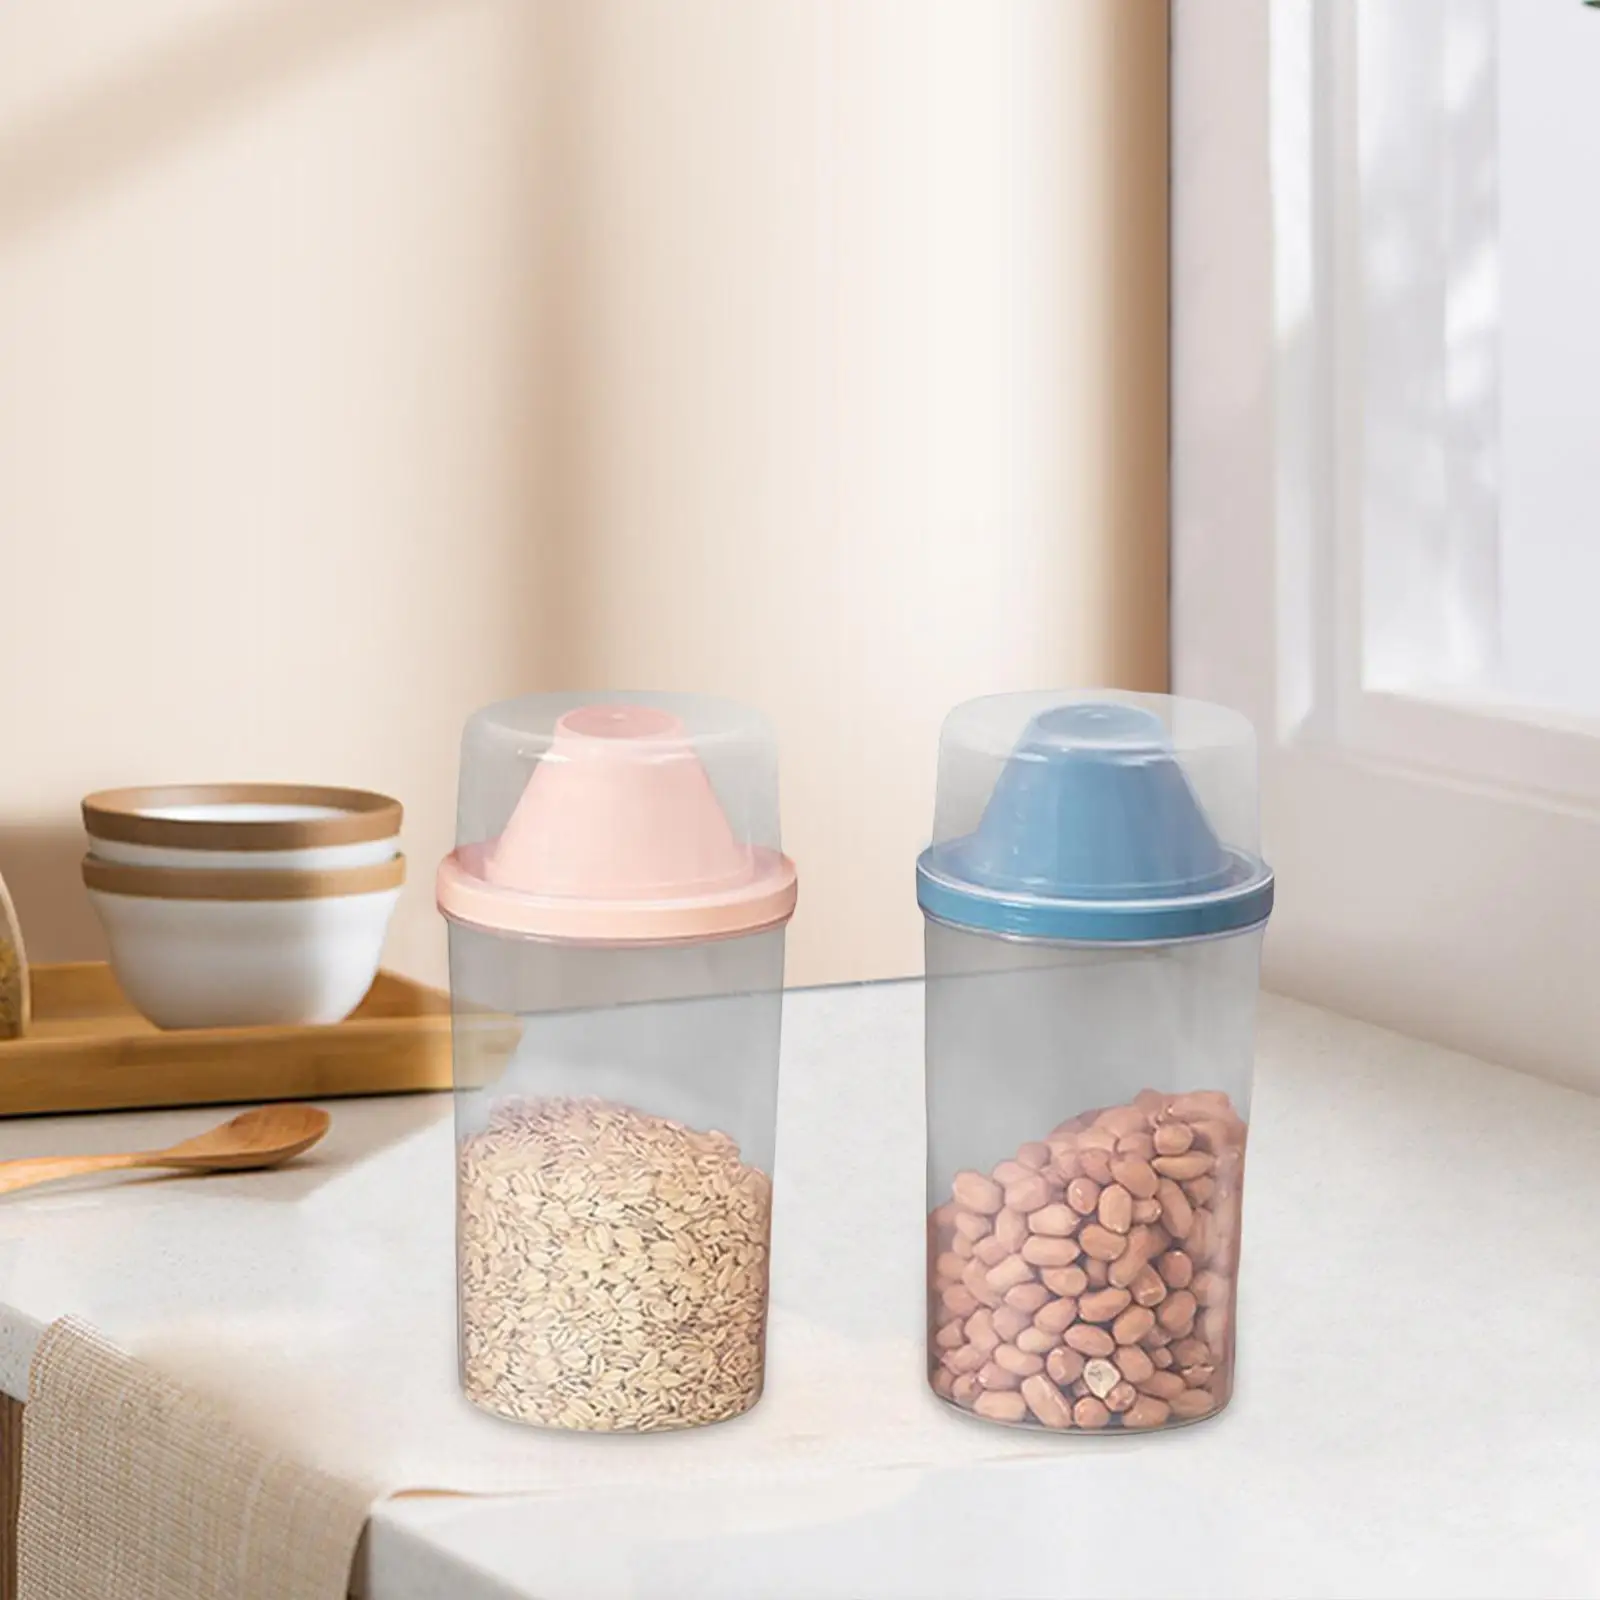 Airtight Food Storage Container Transparent 1000ml with Lid Dispenser Rice Tank for Flour Baking Supplies Beans Sugar Kitchen